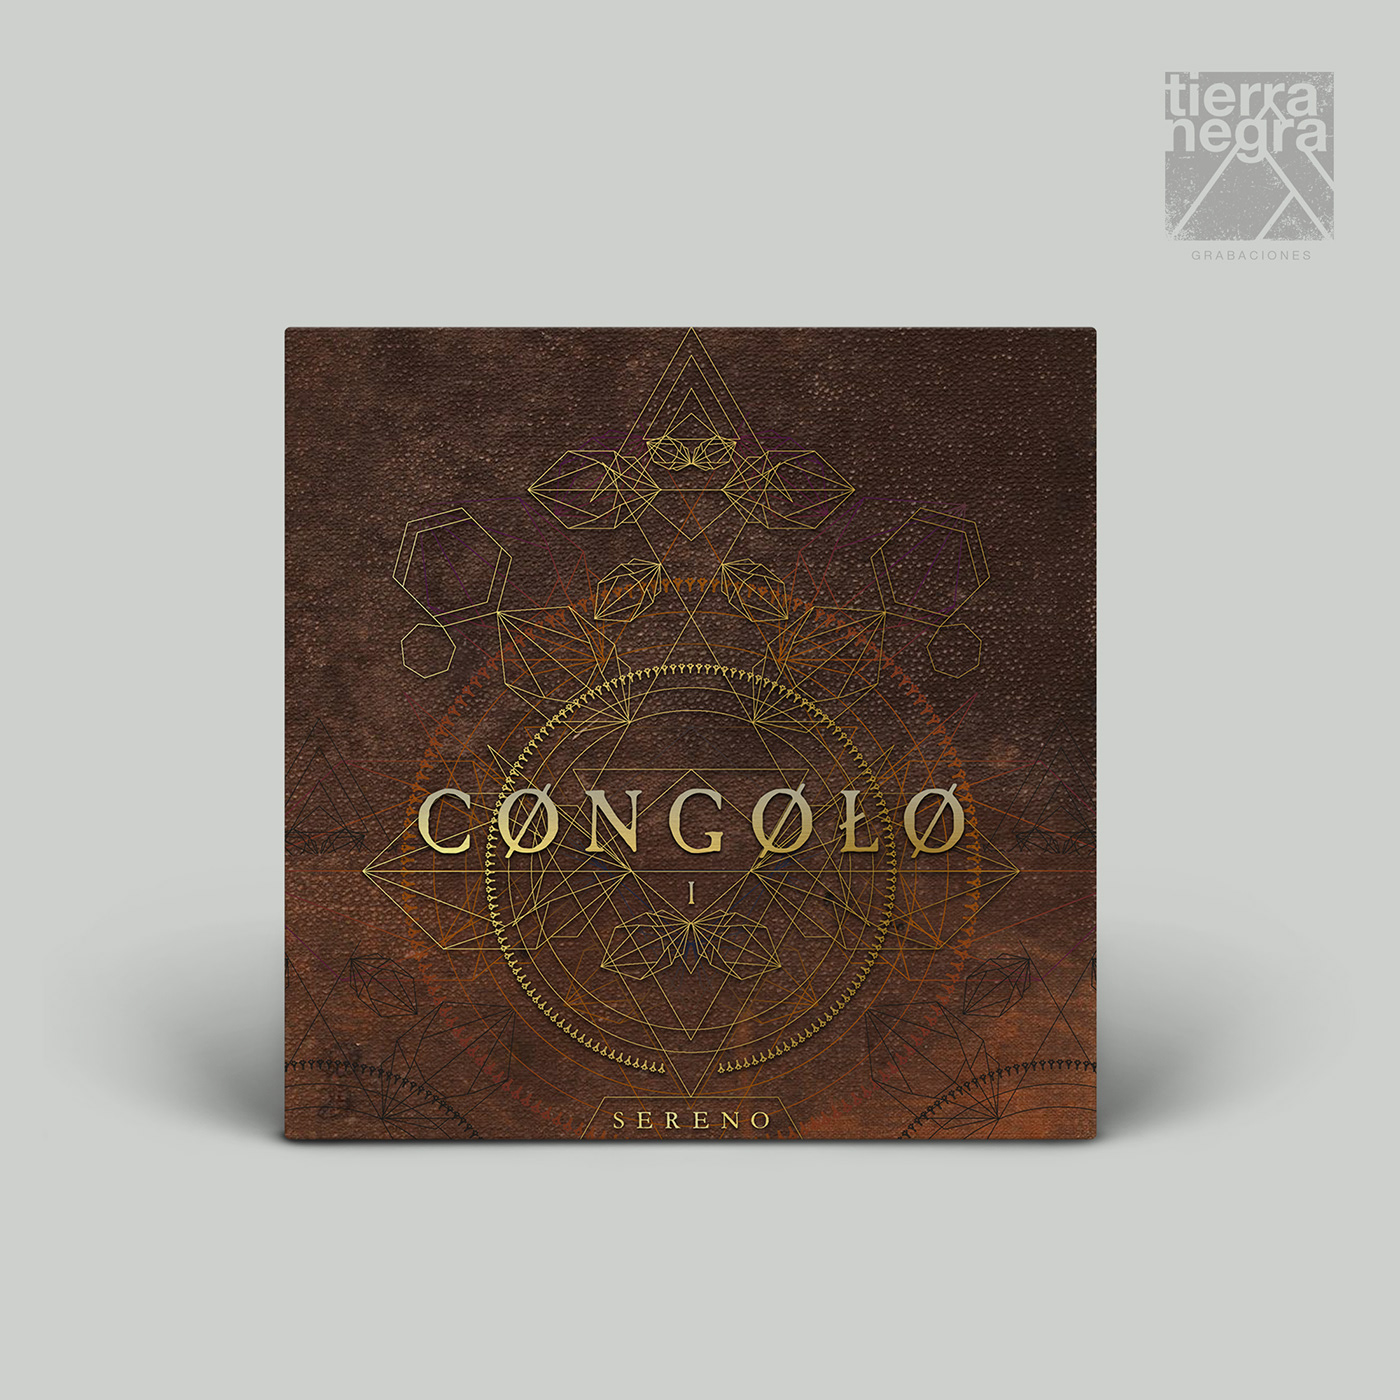 album covers colombian music design for music independent music Music Artwork